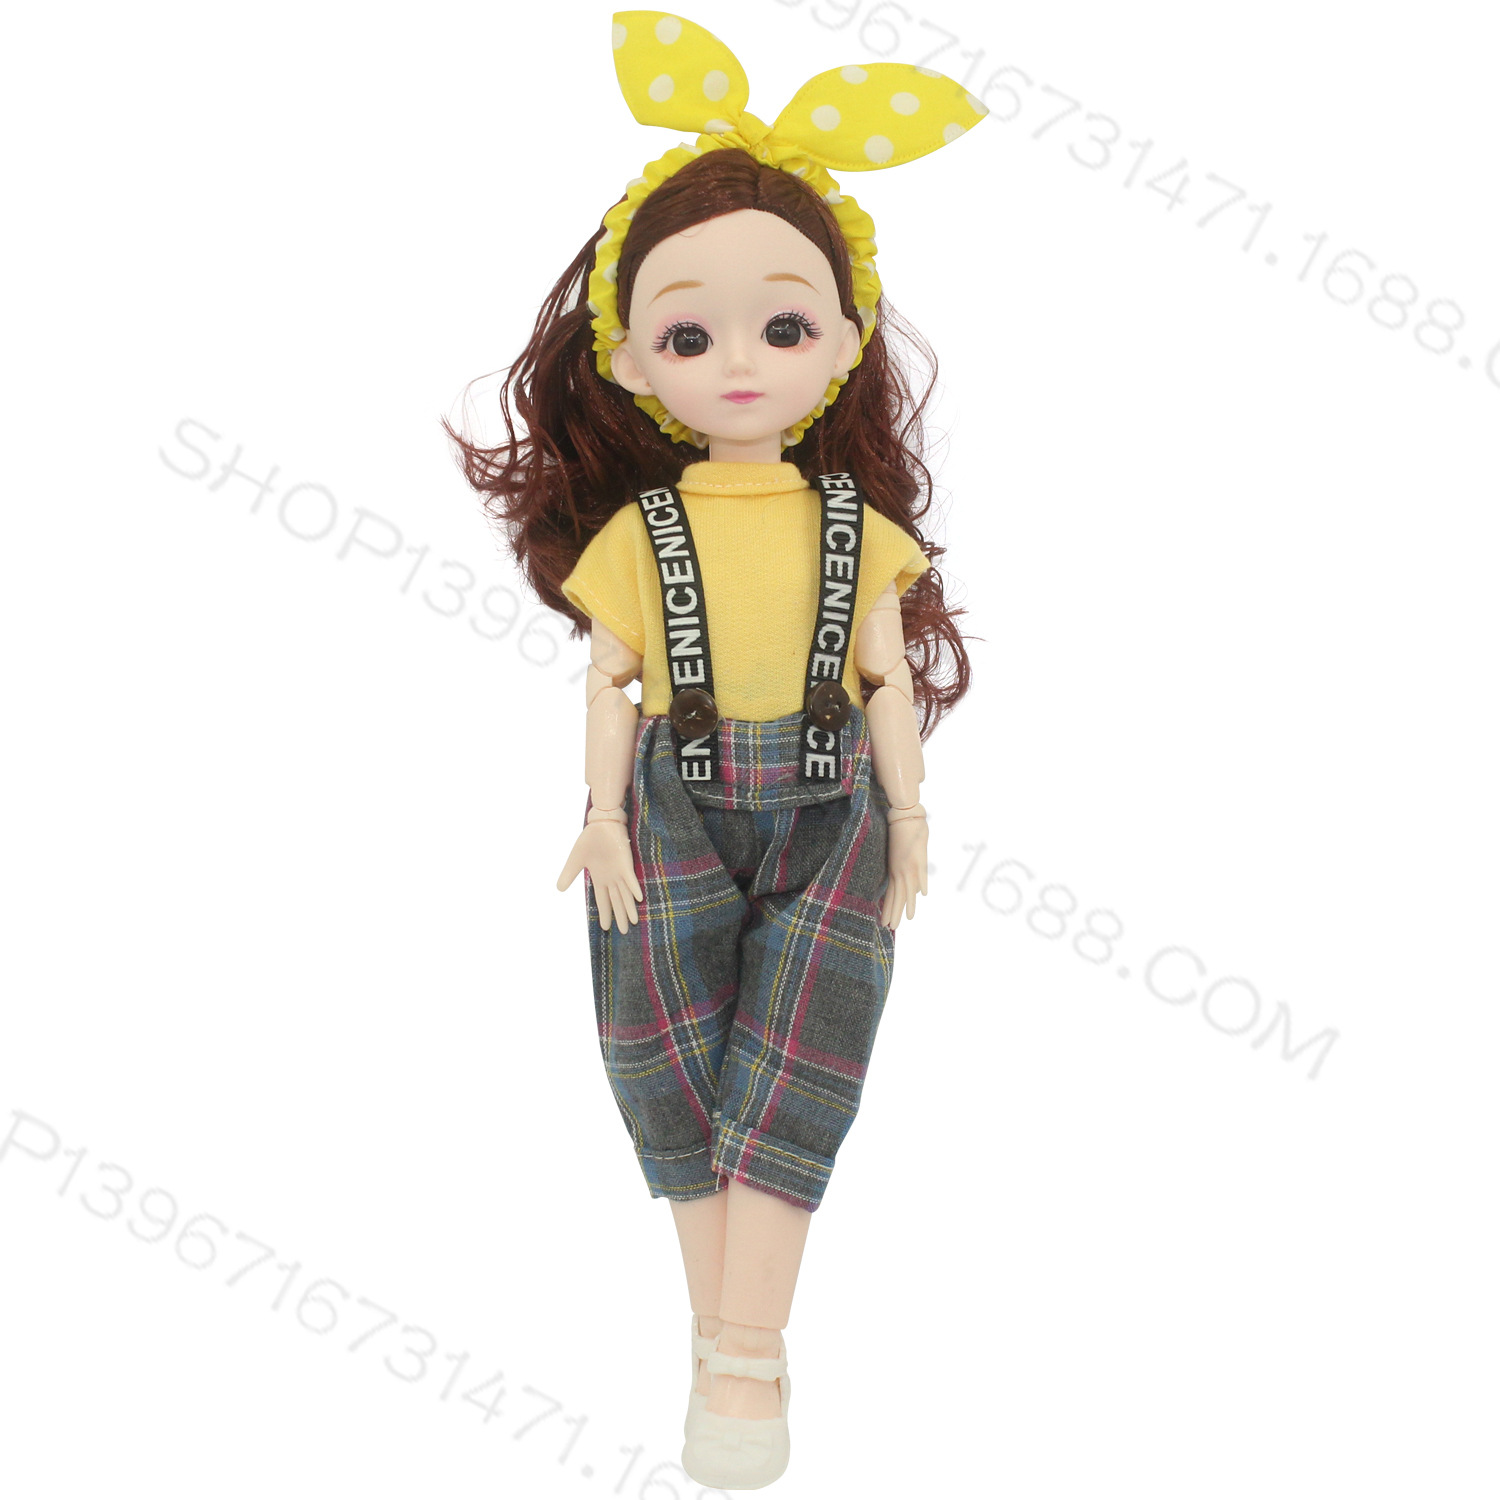 Change up girls toy clothes 30cm bjd simulation doll fat body cute wind doll set